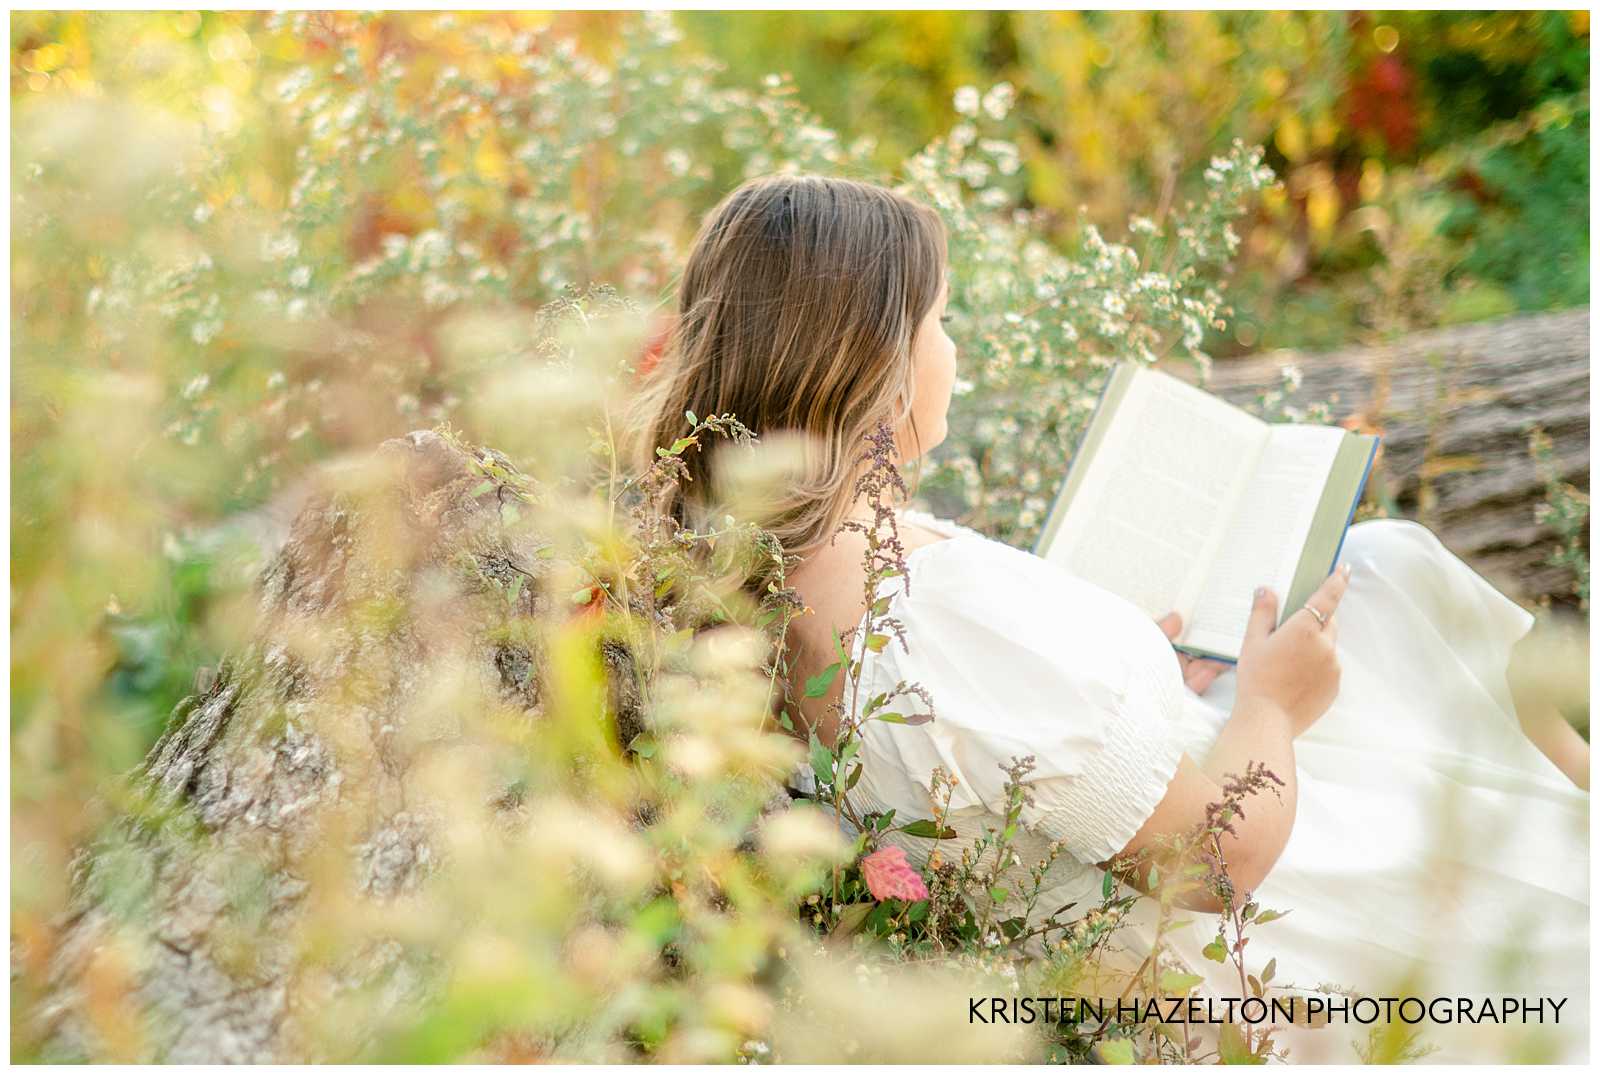 Books aesthetic photoshoot in Chicago; high school senior girl wearing a white dress reading a book while leaning against a tree stump